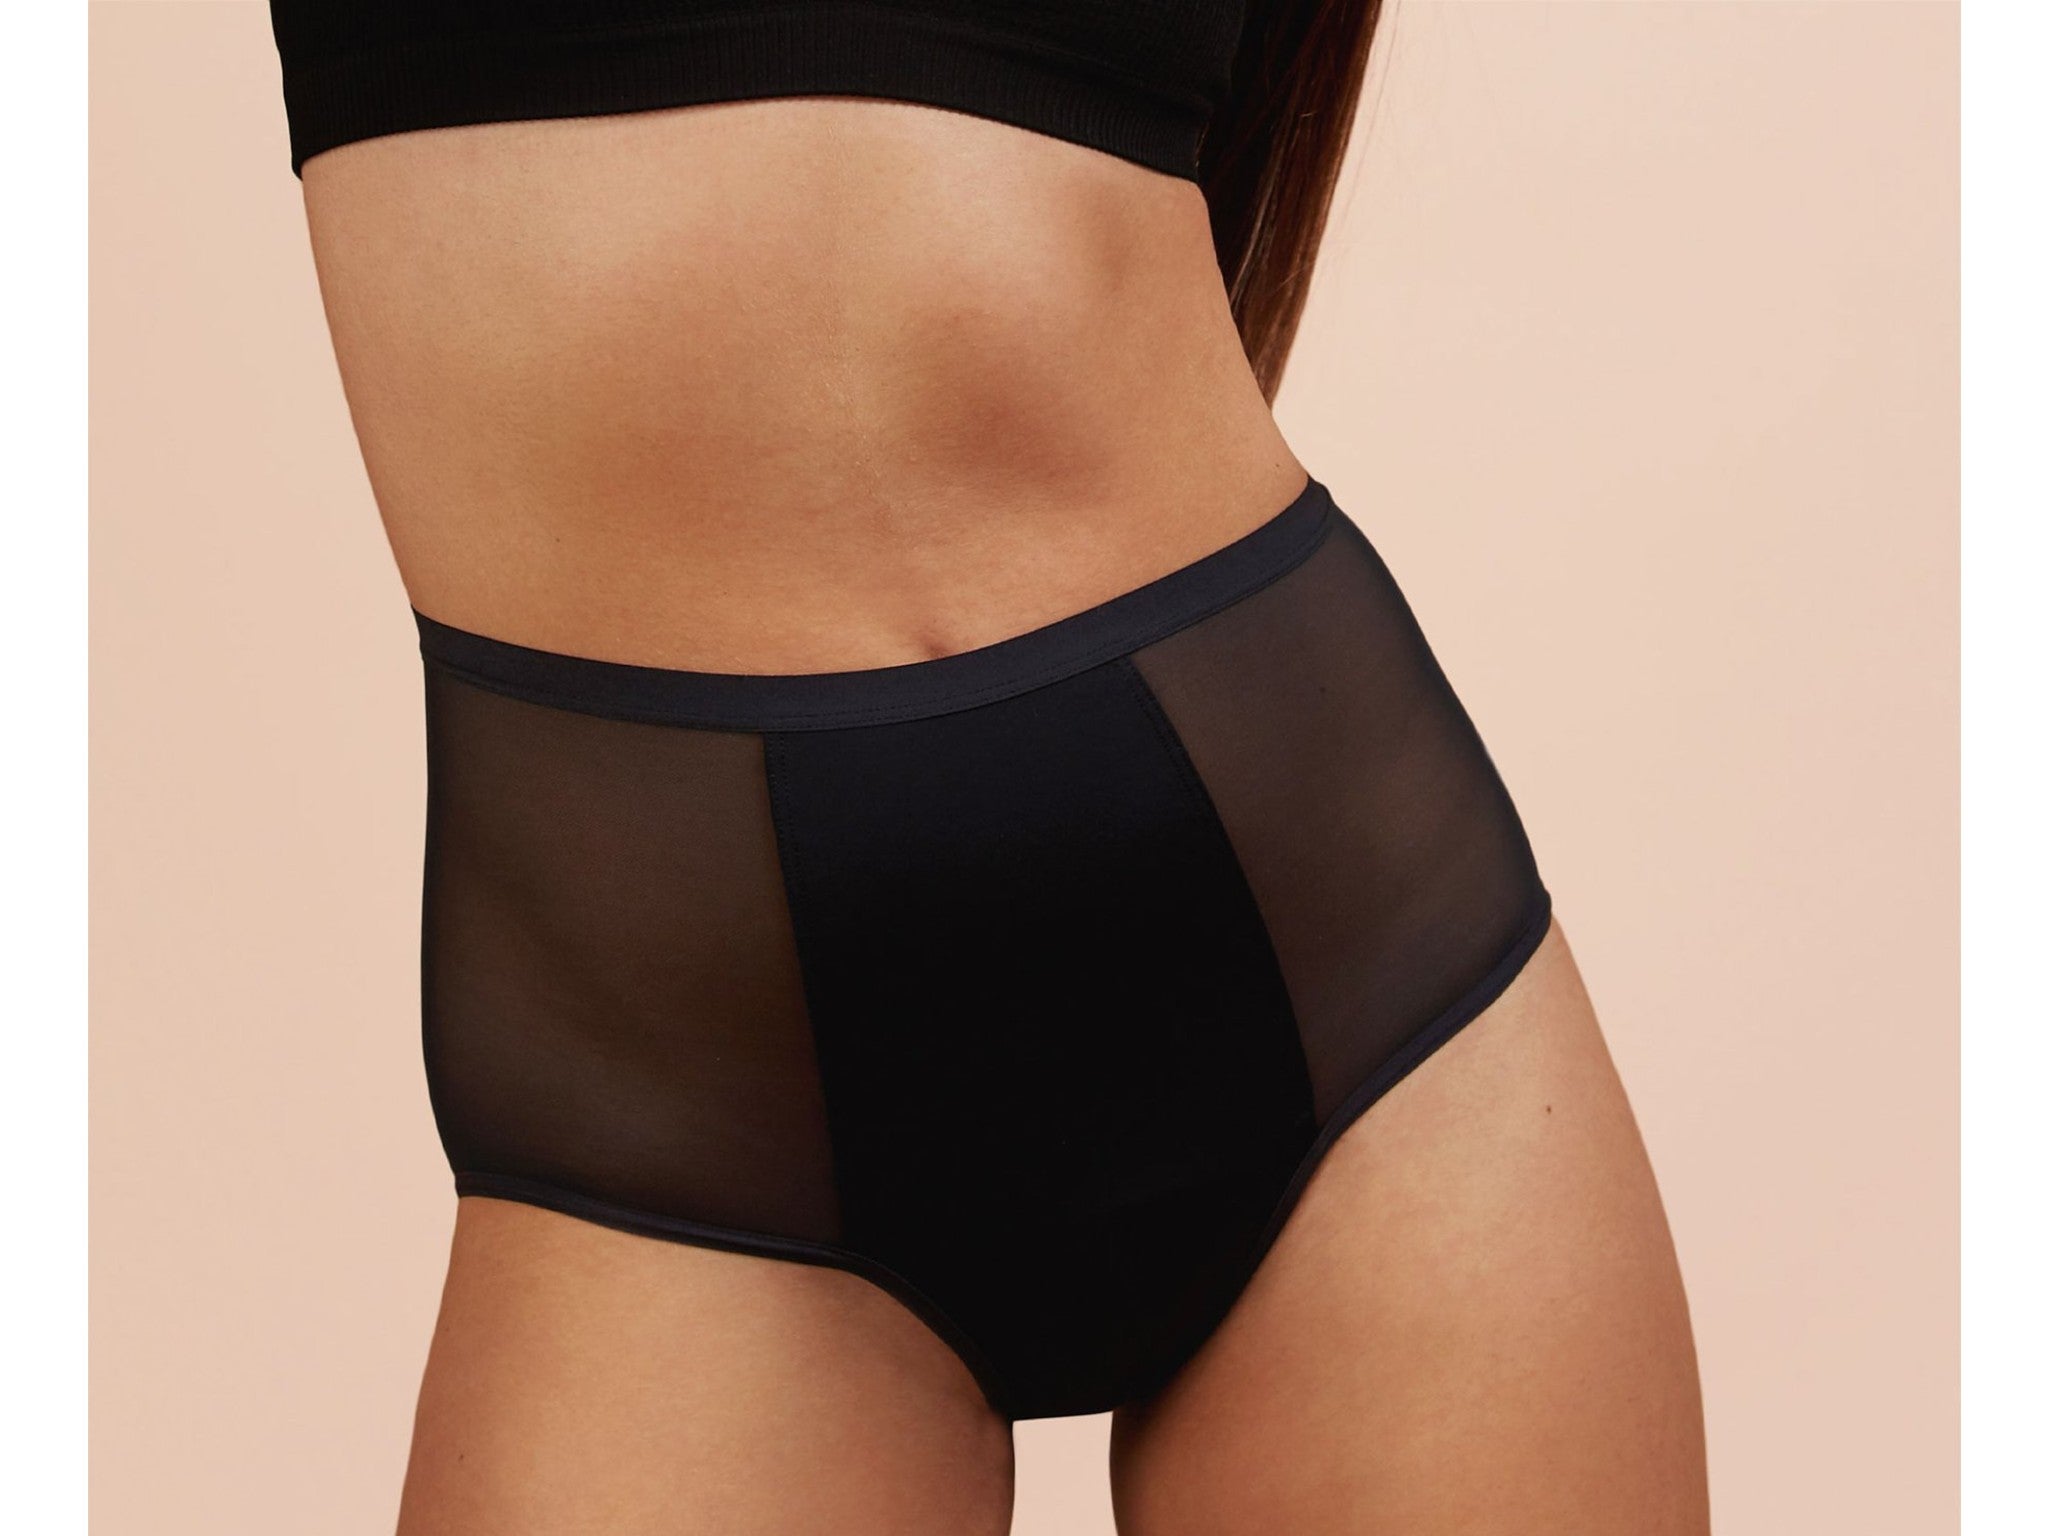 Period Pants: We Review Thinx, ModiBodi, Flux and Wuka Knickers